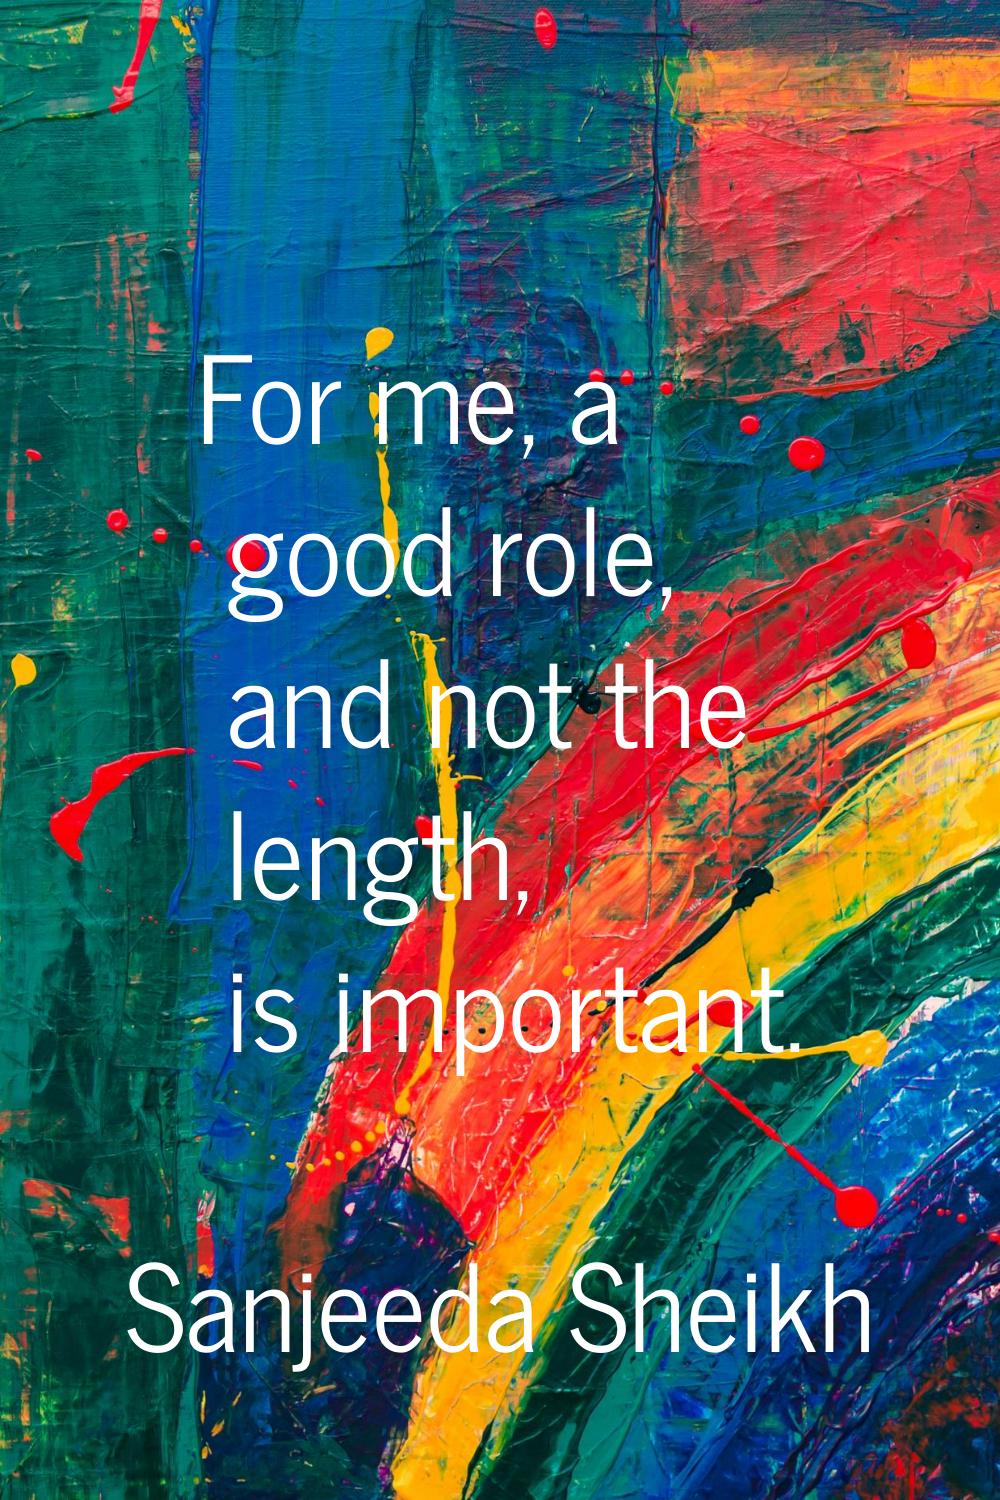 For me, a good role, and not the length, is important.